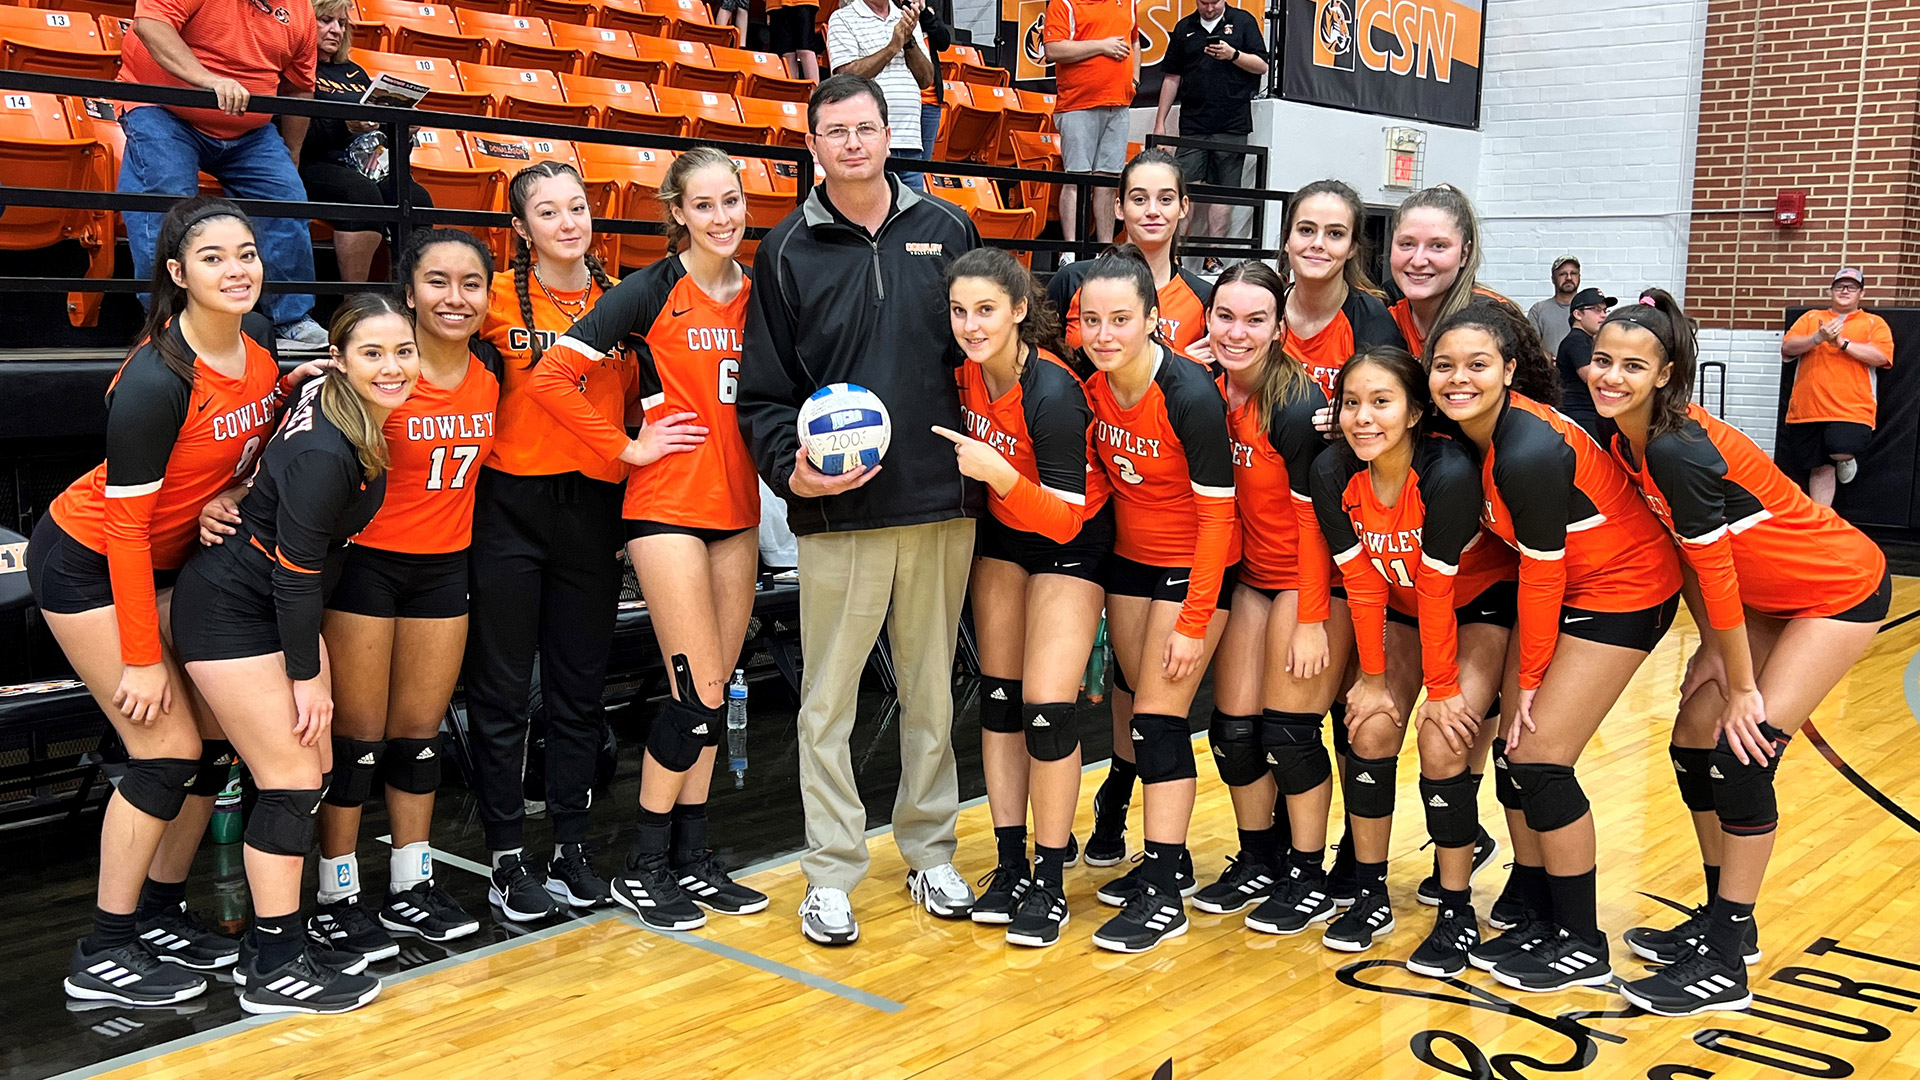 Coach Gream honored for 200th win at Cowley College